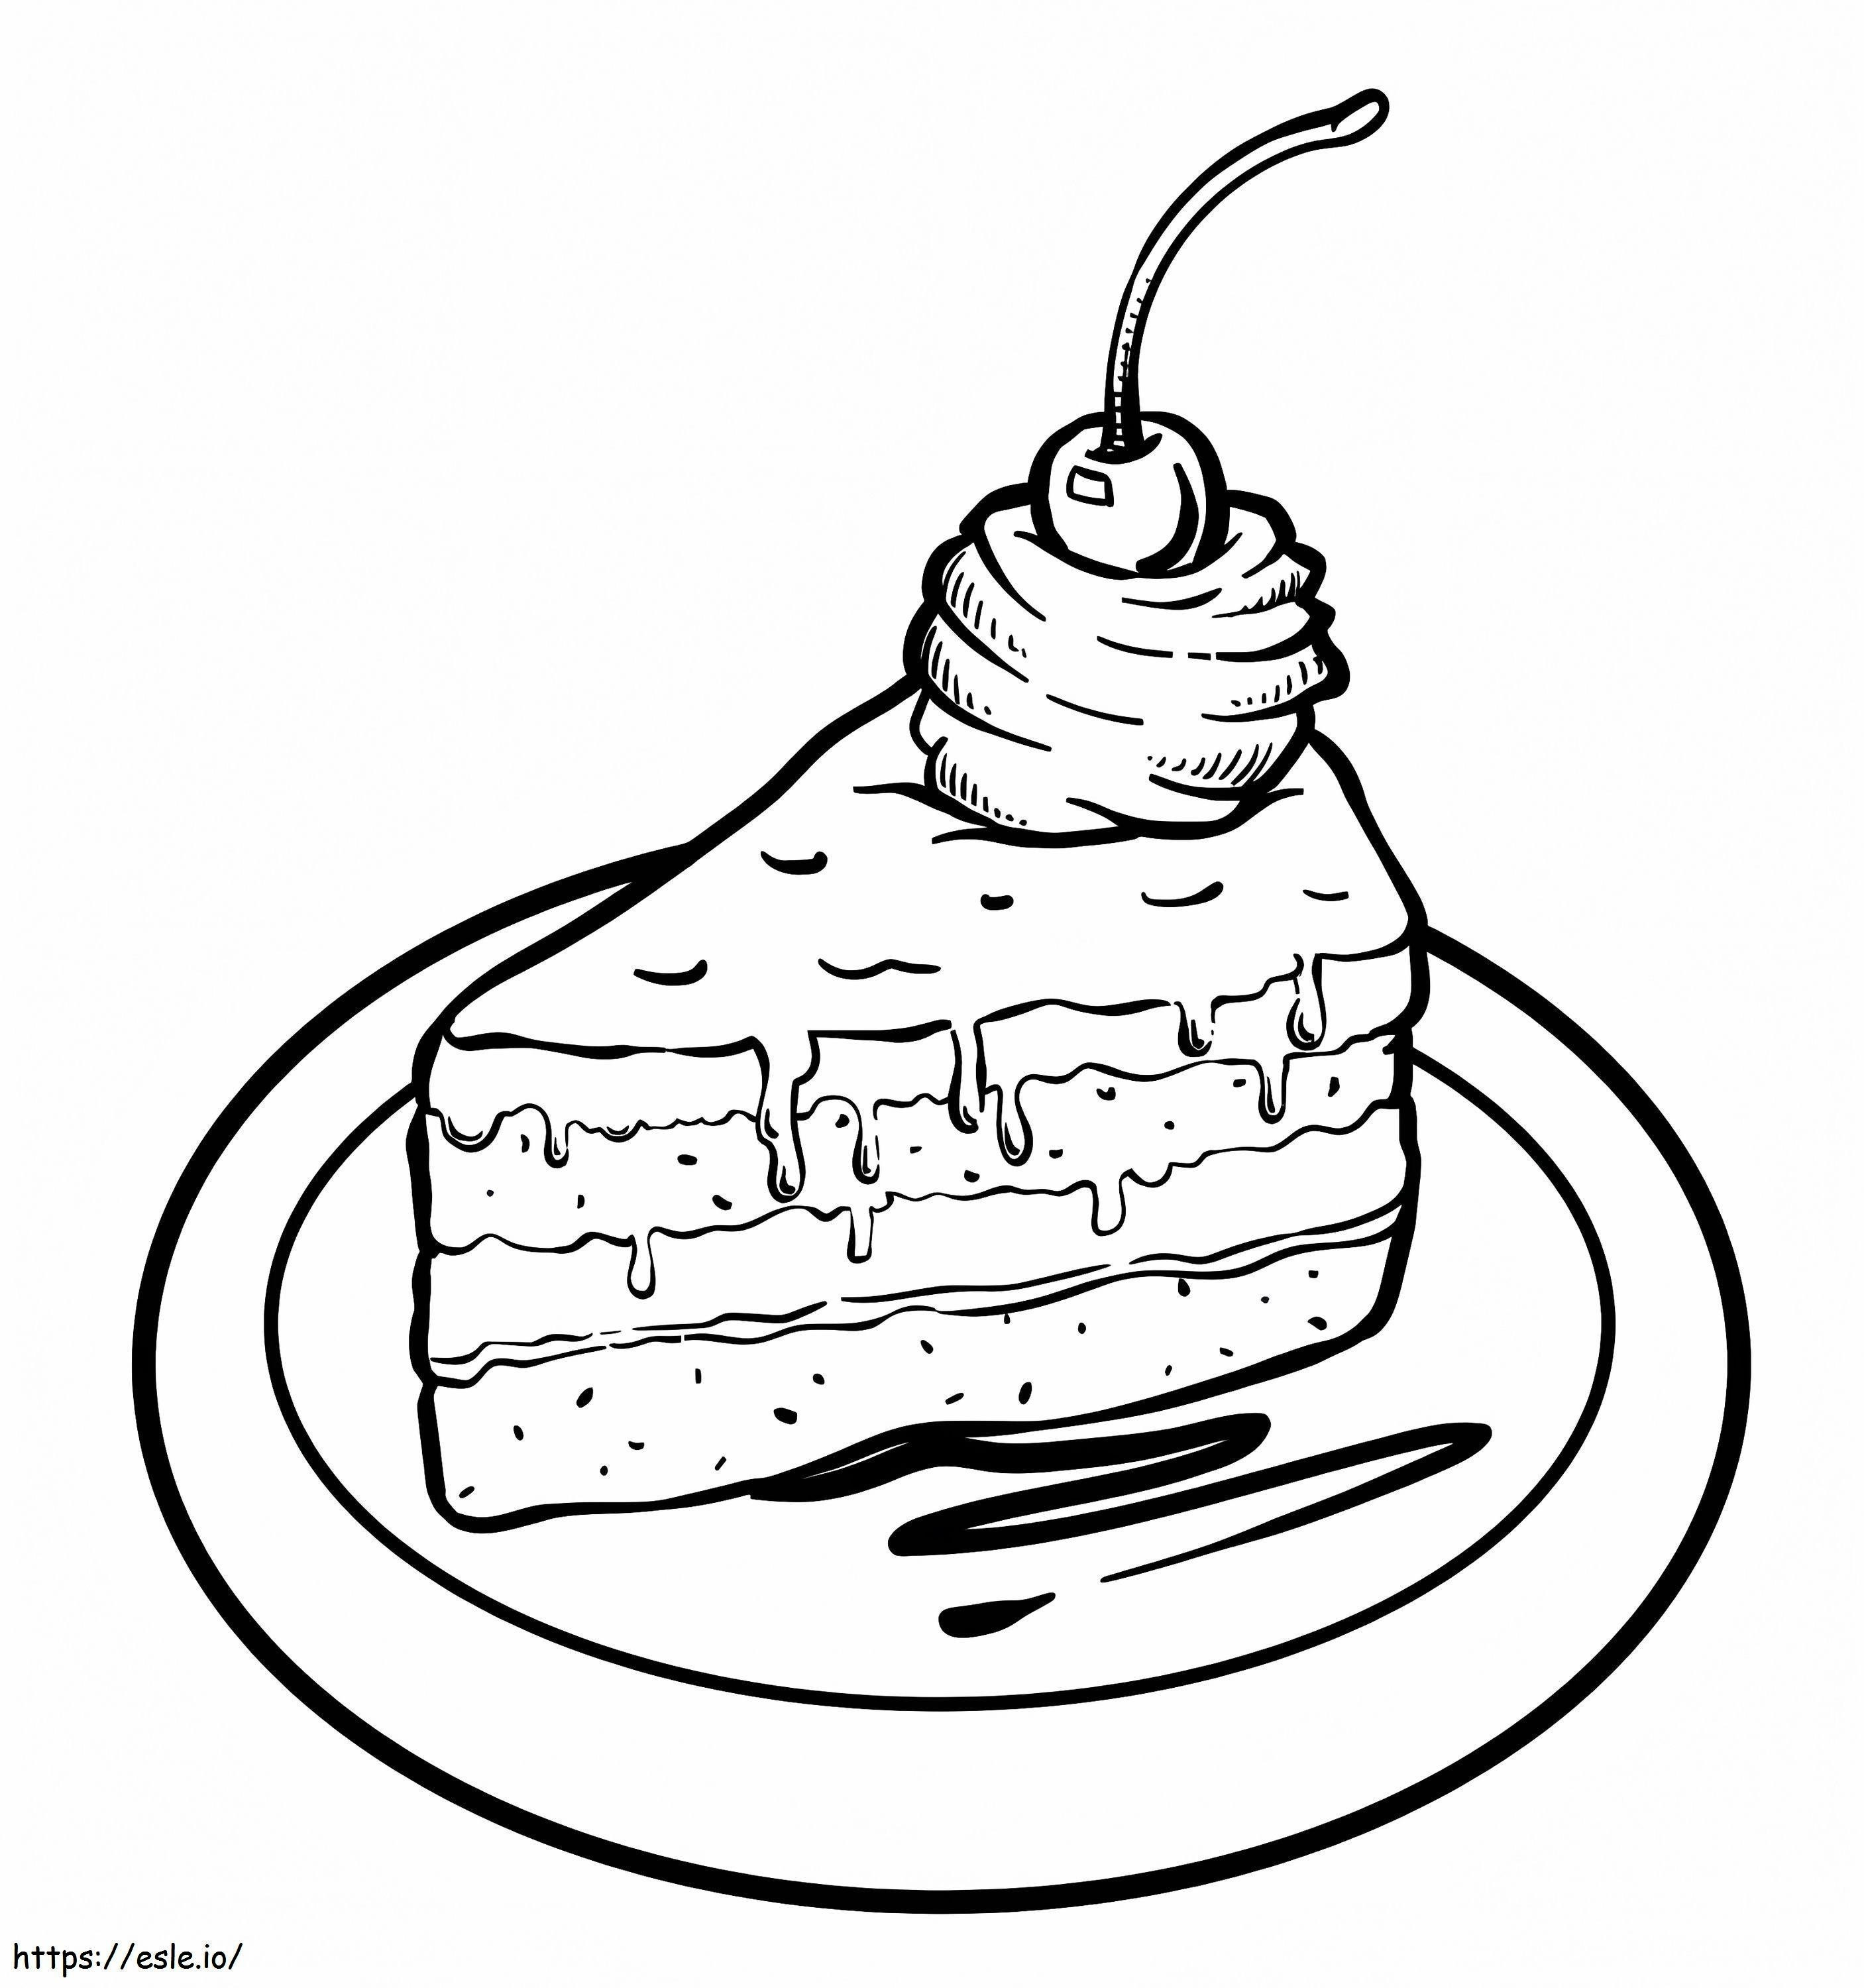 Cake On Plate coloring page